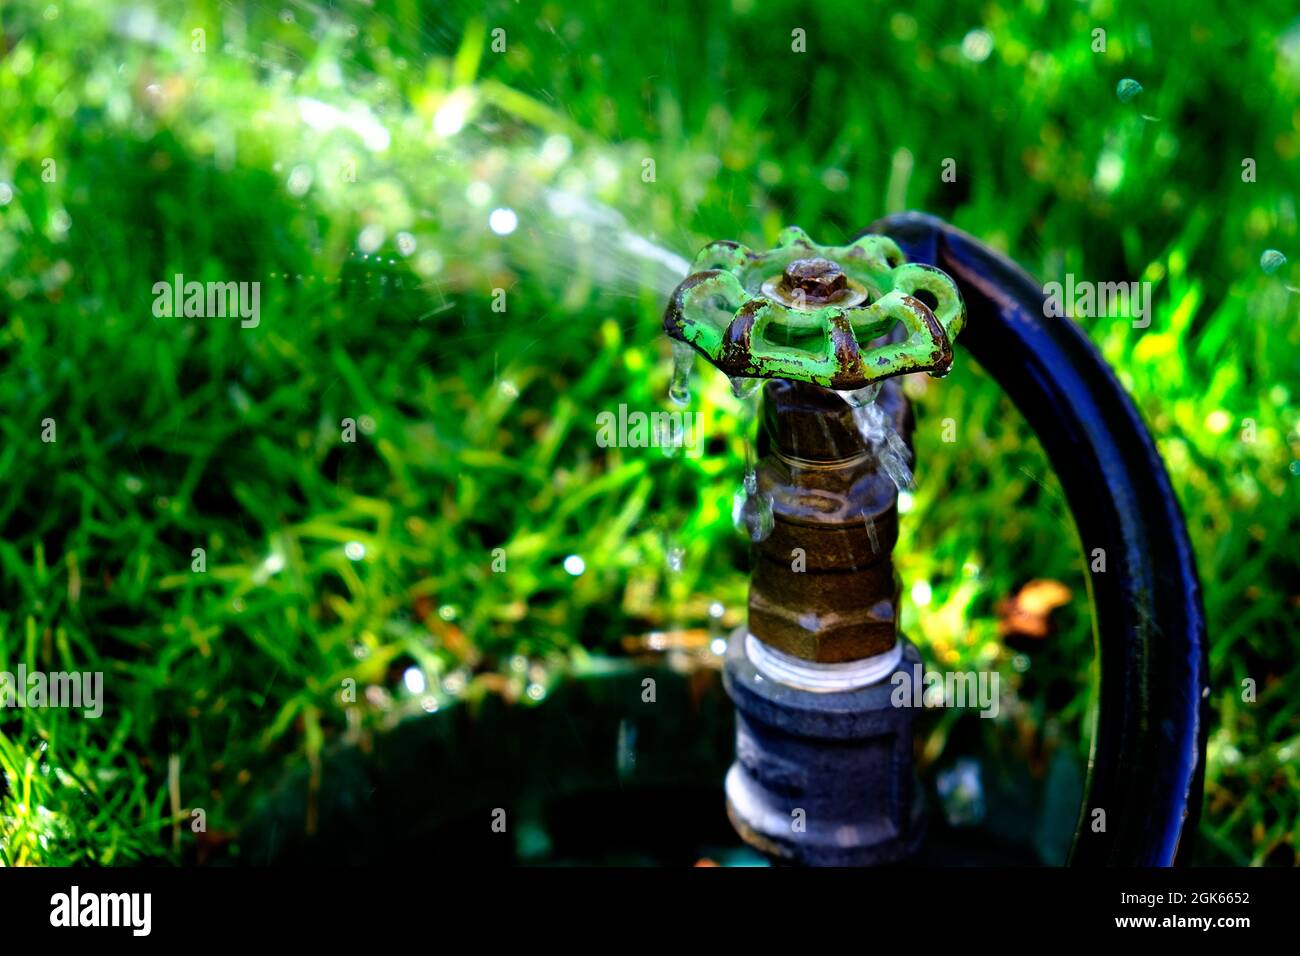 Leaky water faucet with hose spraying water out onto grass drops spray Stock Photo